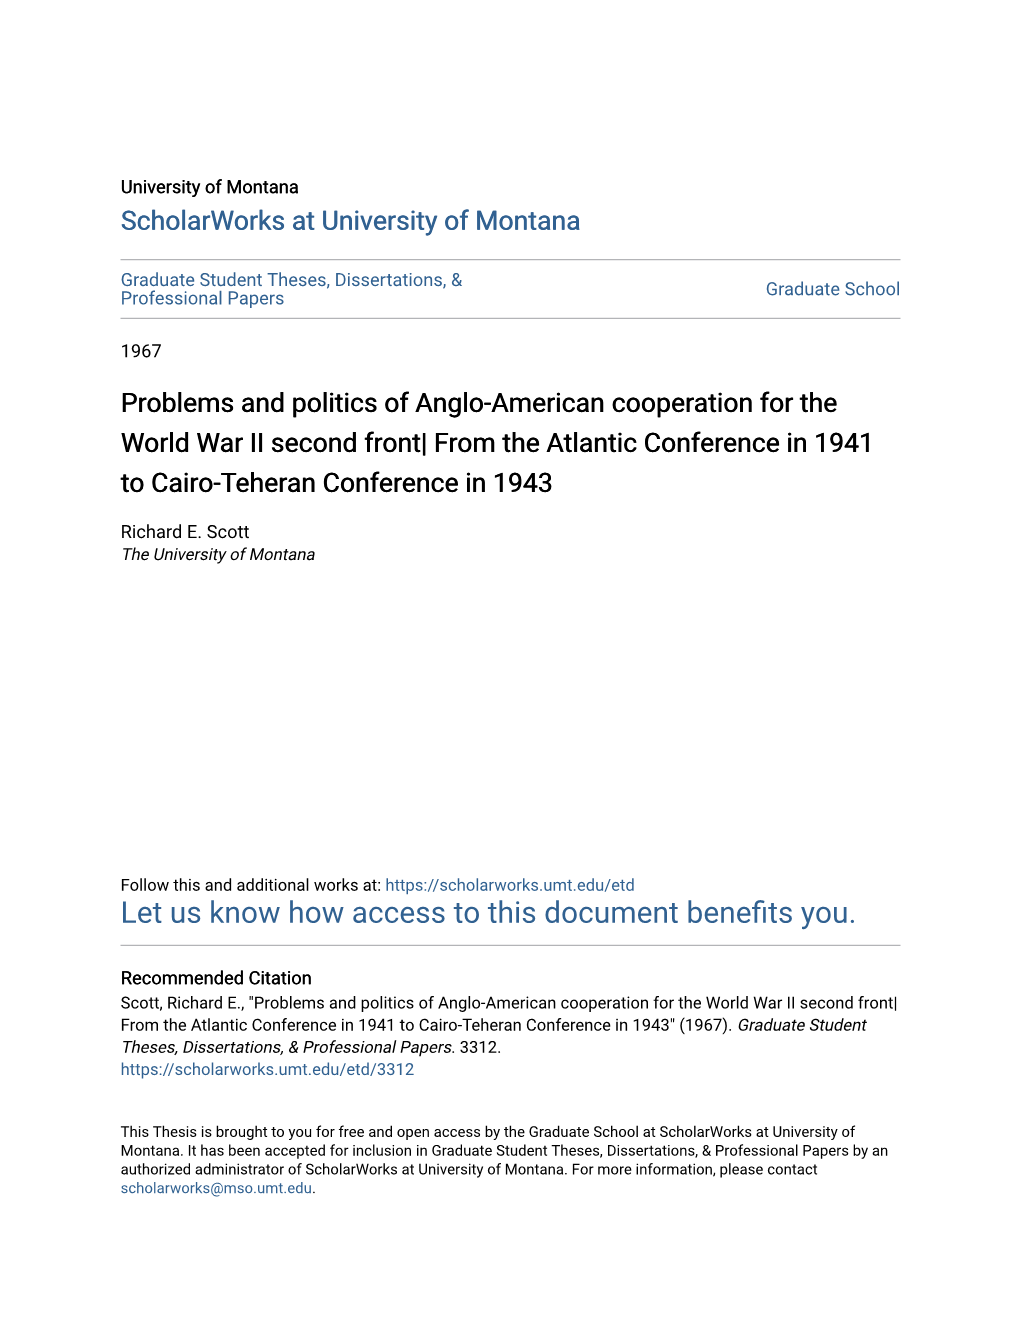 Problems and Politics of Anglo-American Cooperation for the World War II Second Front| from the Atlantic Conference in 1941 to Cairo-Teheran Conference in 1943